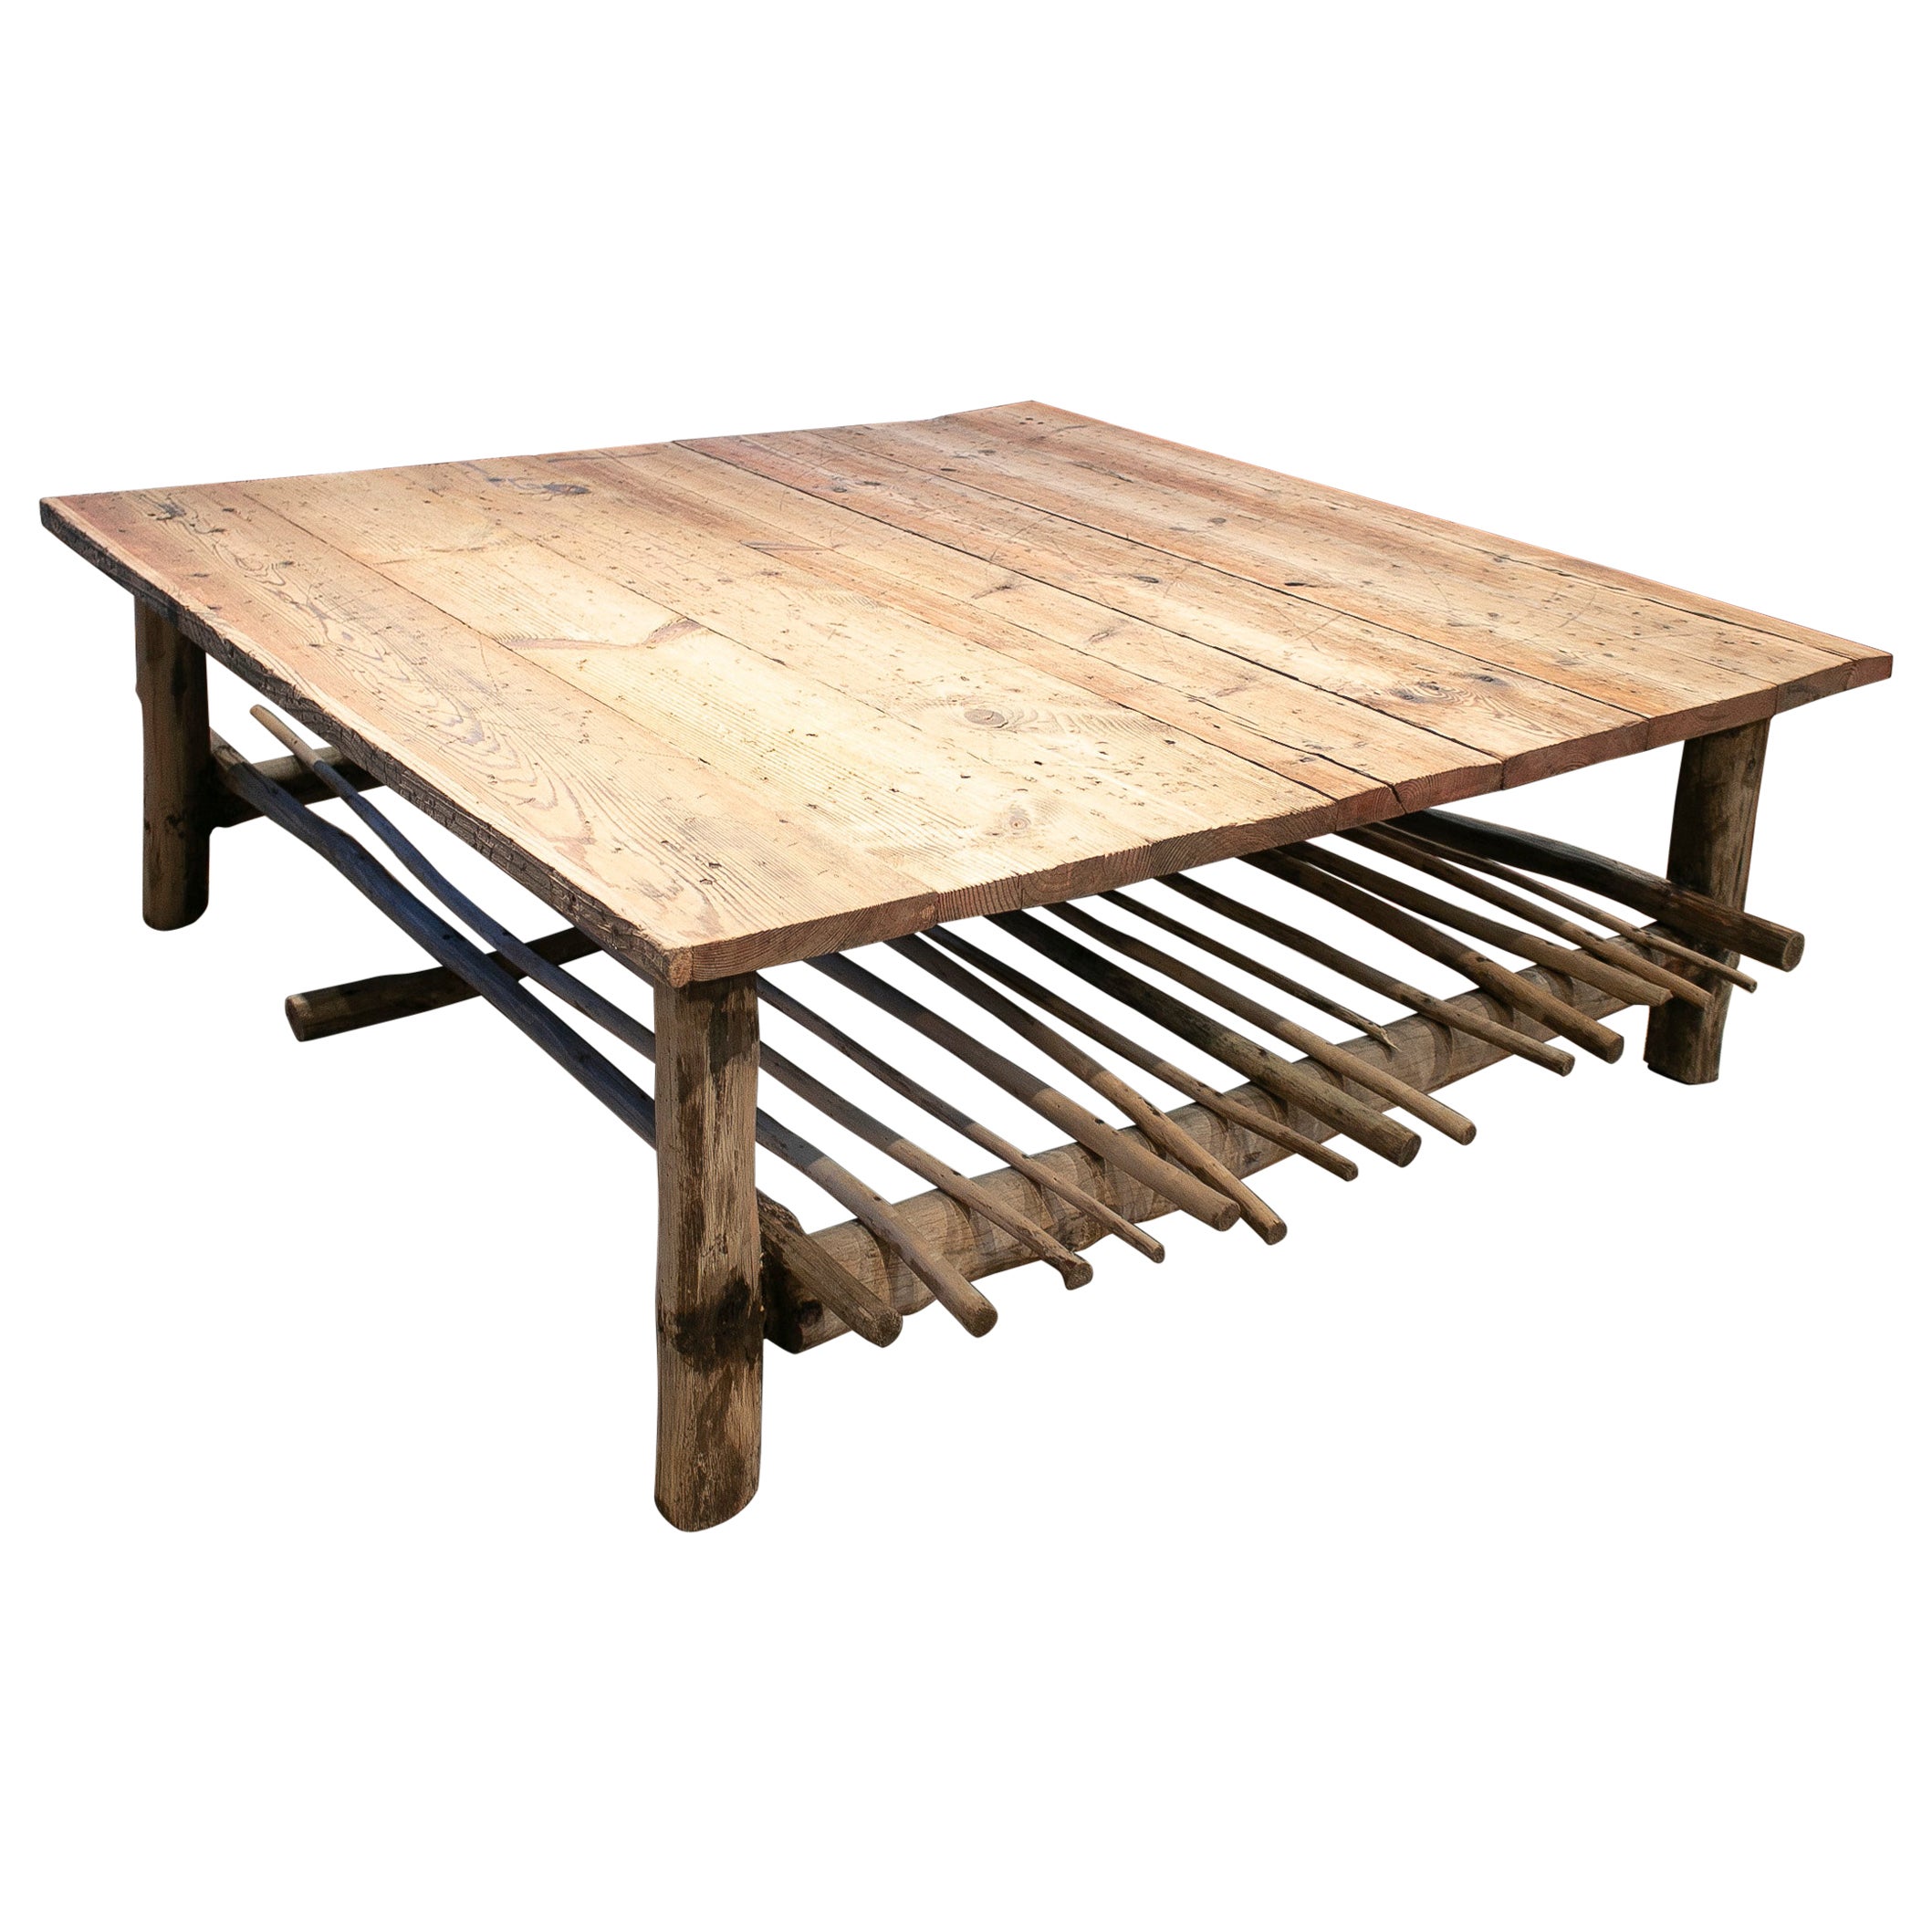 1980s Spanish Handmade Wooden Coffee Table For Sale at 1stDibs